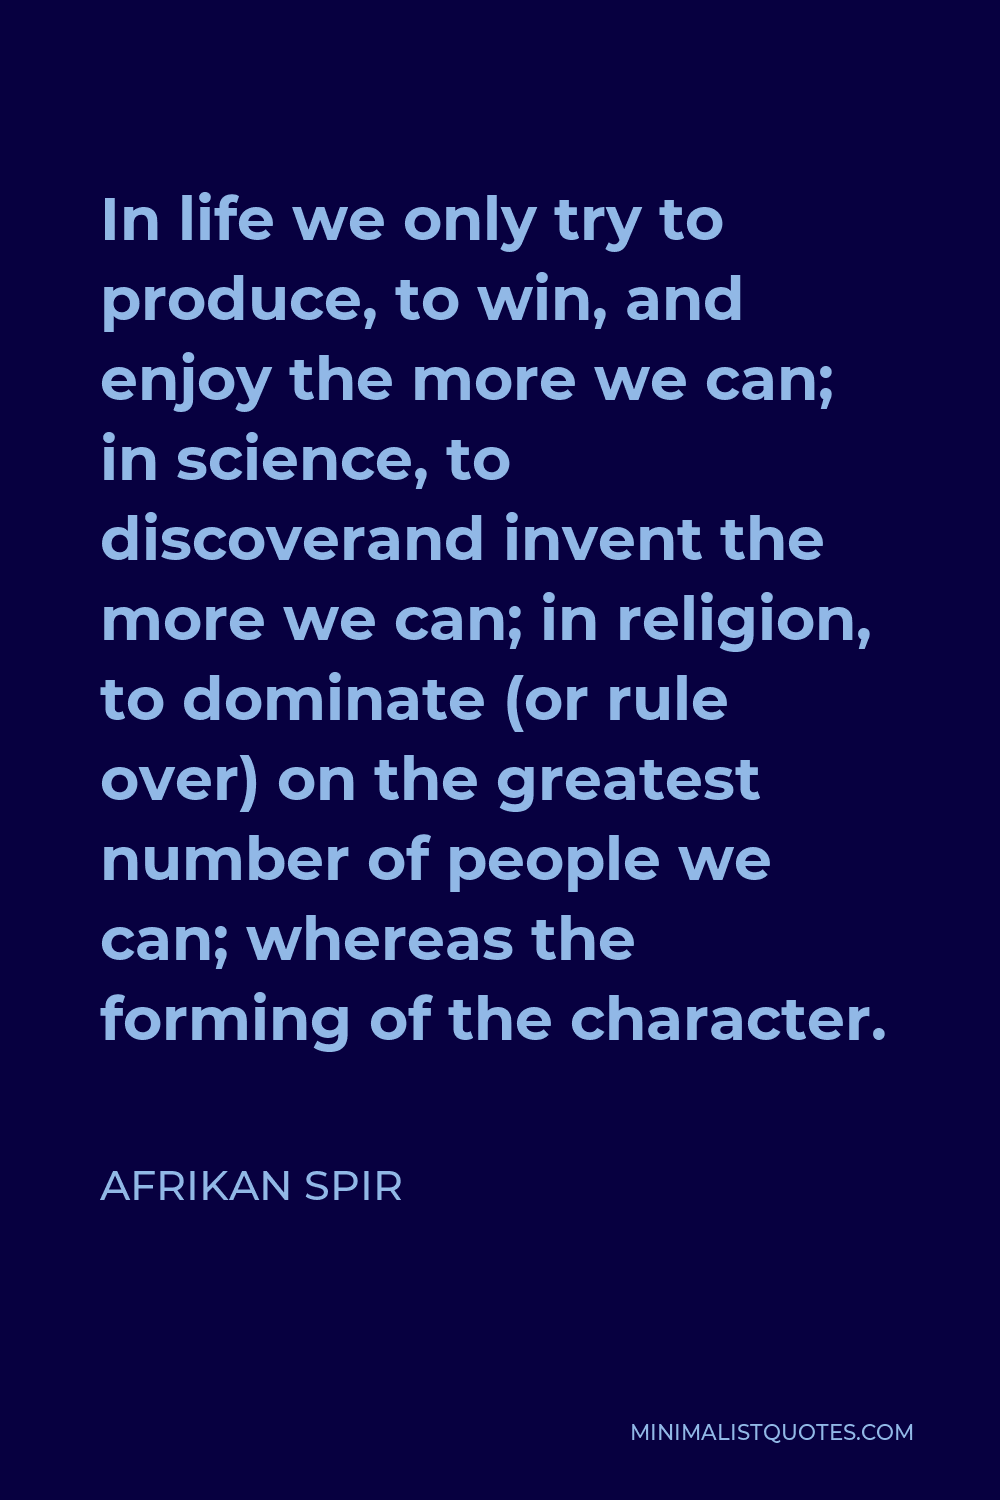 Afrikan Spir Quote - In life we only try to produce, to win, and enjoy the more we can; in science, to discoverand invent the more we can; in religion, to dominate (or rule over) on the greatest number of people we can; whereas the forming of the character.